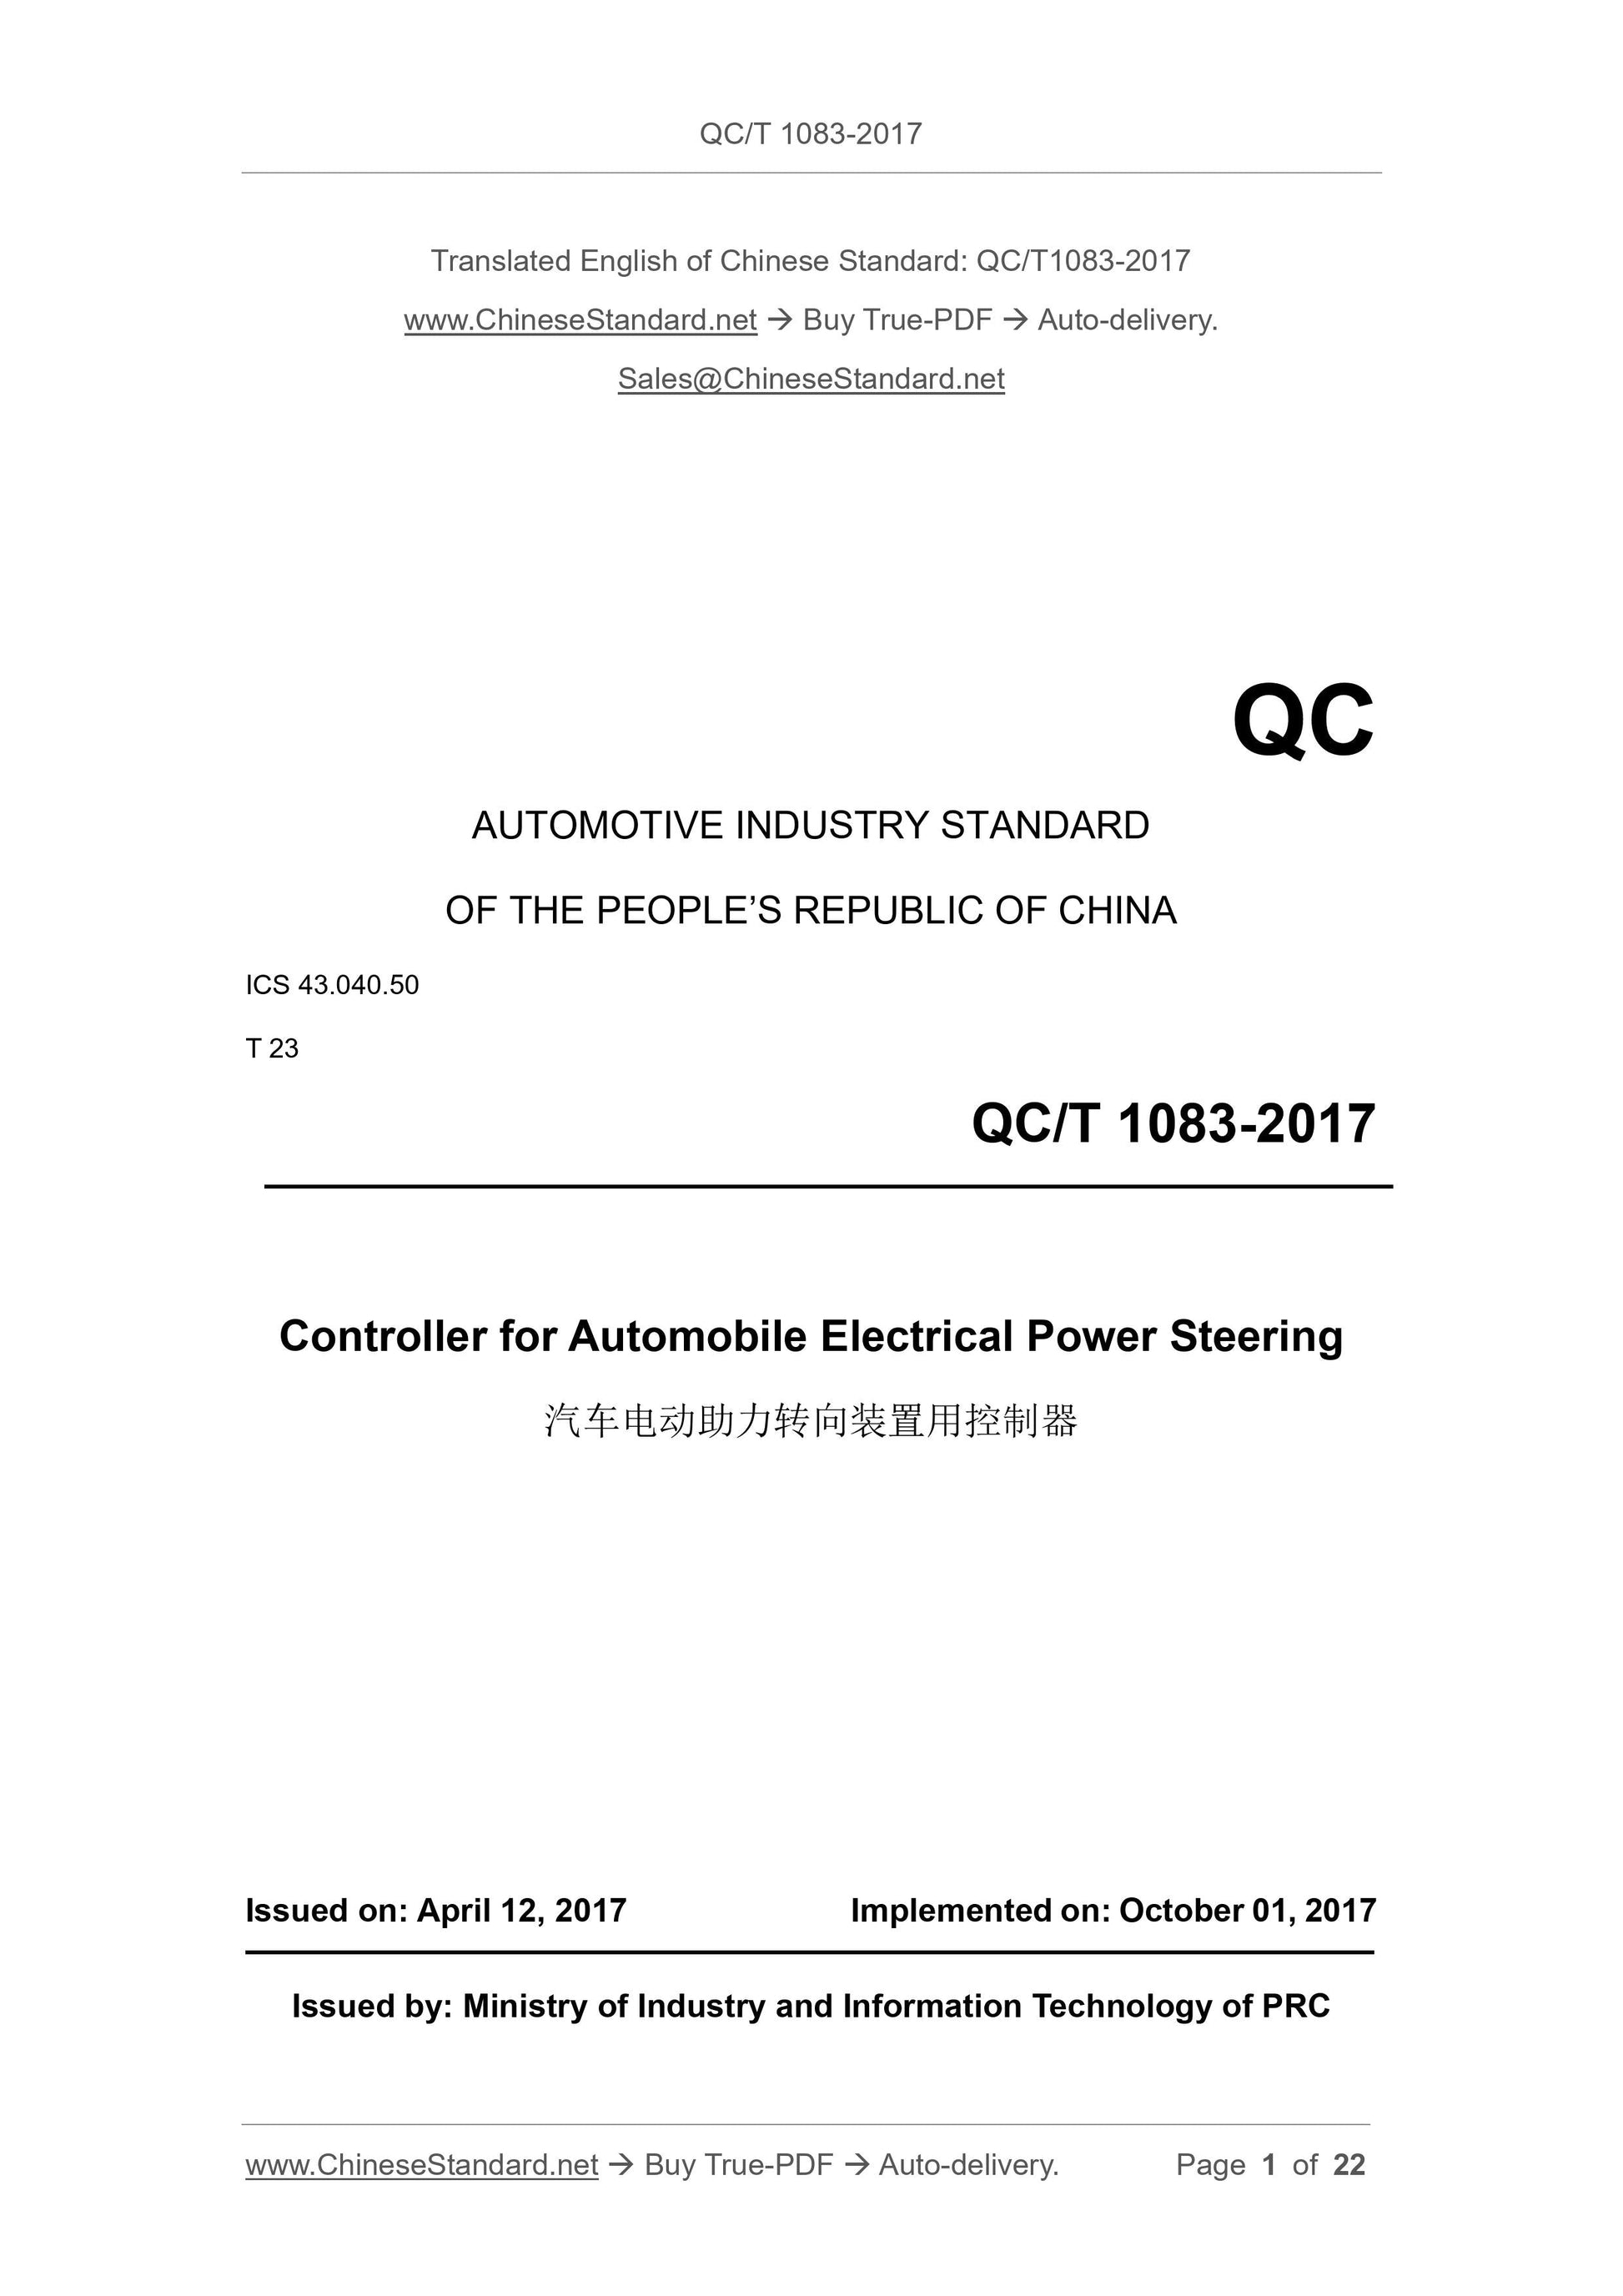 QC/T 1083-2017 Page 1